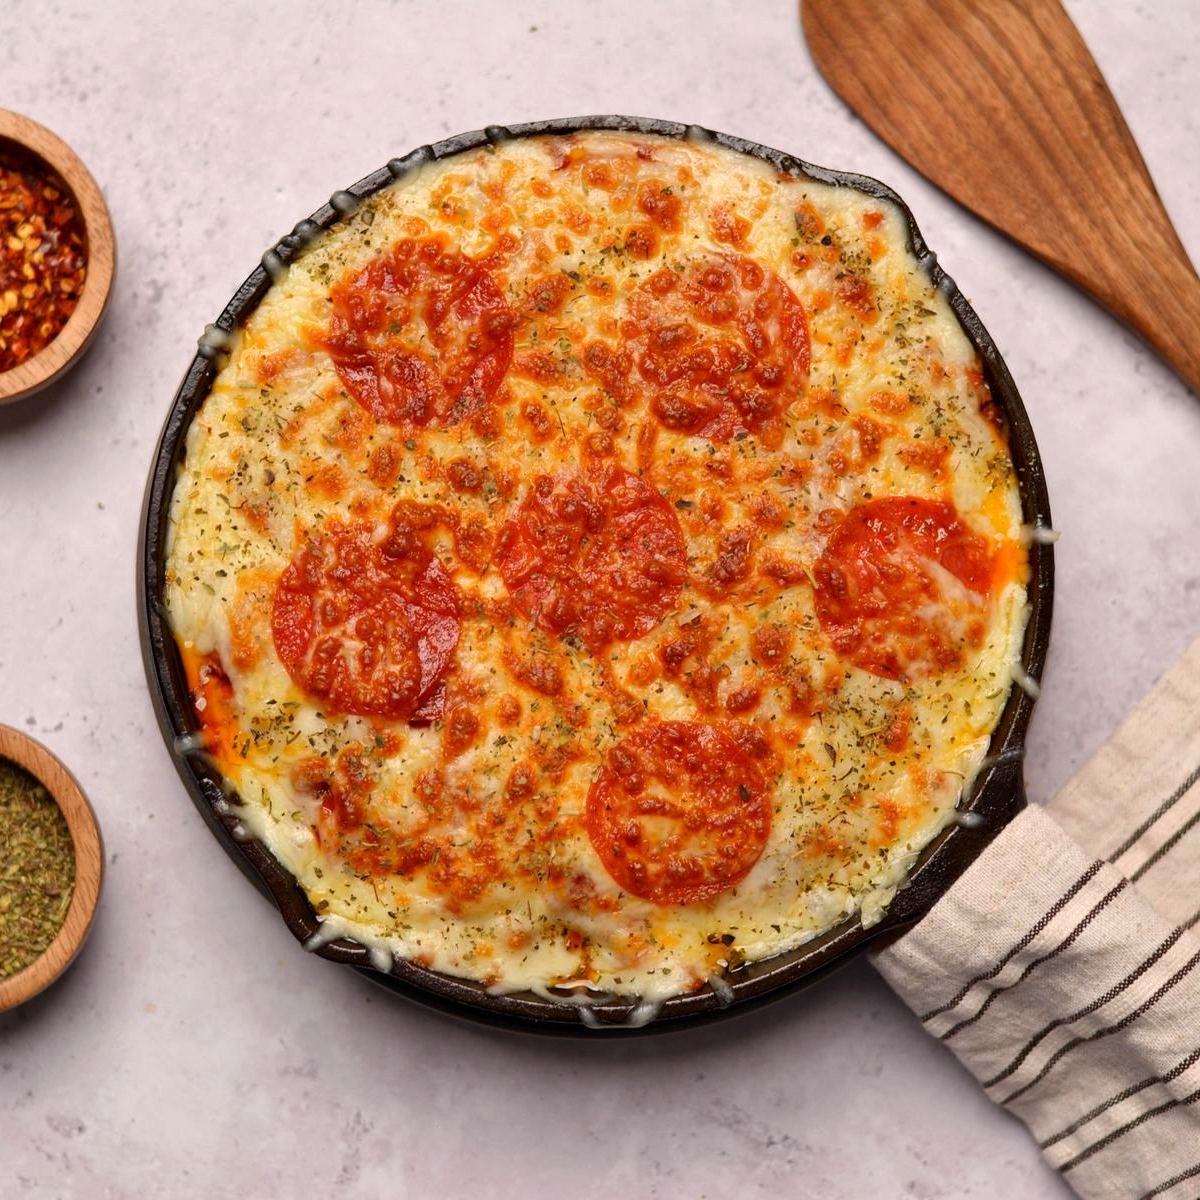 Pepperonis and golden brown cheese in a black skillet with spices in wooden bowls and a wooden spoon on the side.